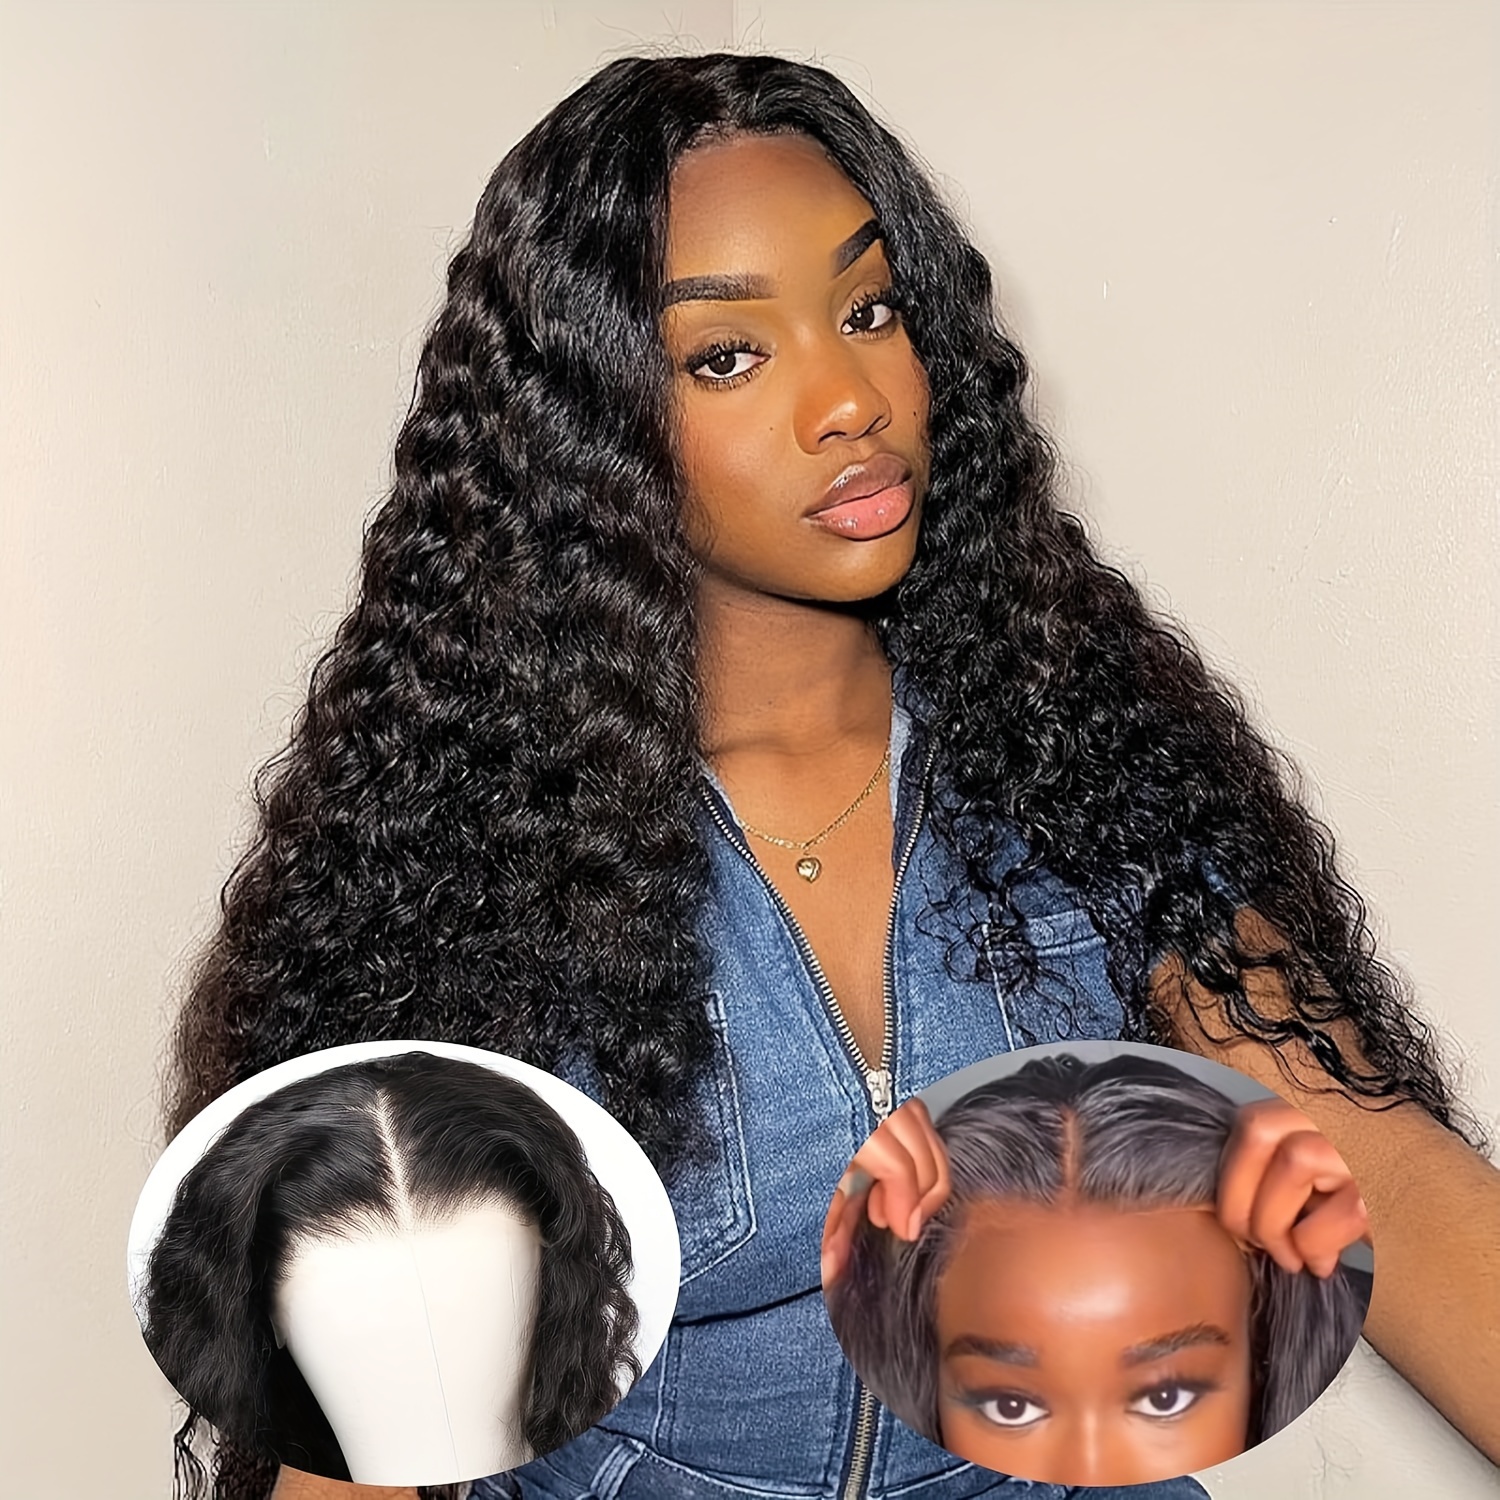  13x6 Deep Wave Lace Front Wigs Human Hair Deep Wave